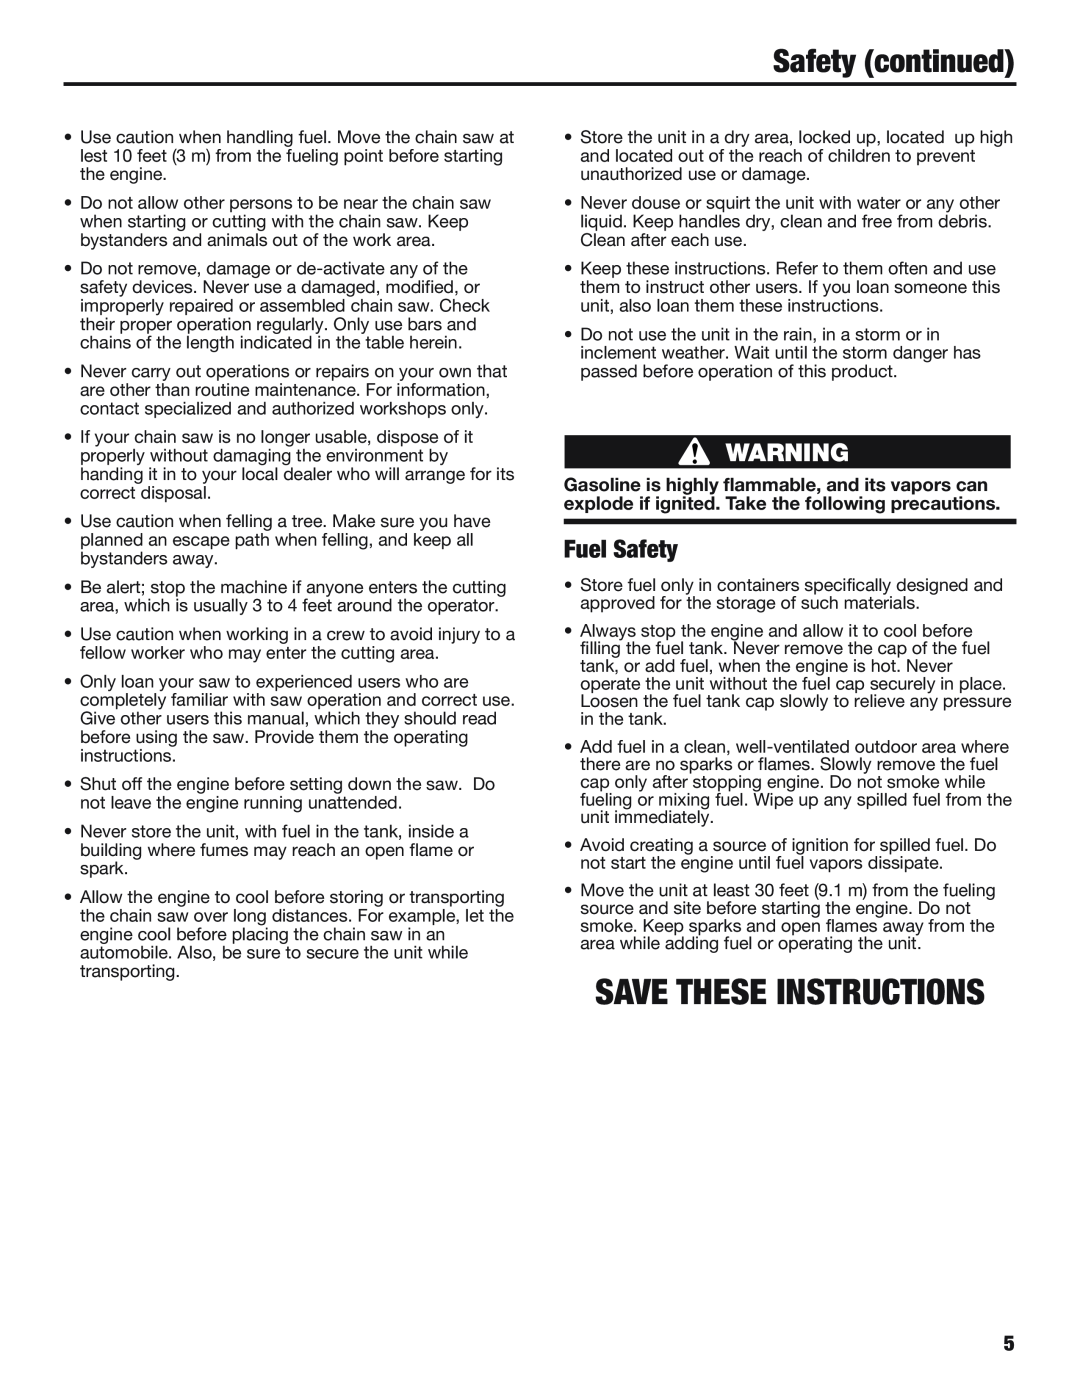 Cub Cadet CS5220, CS5018 manual Fuel Safety, Save These Instructions, Safety continued 